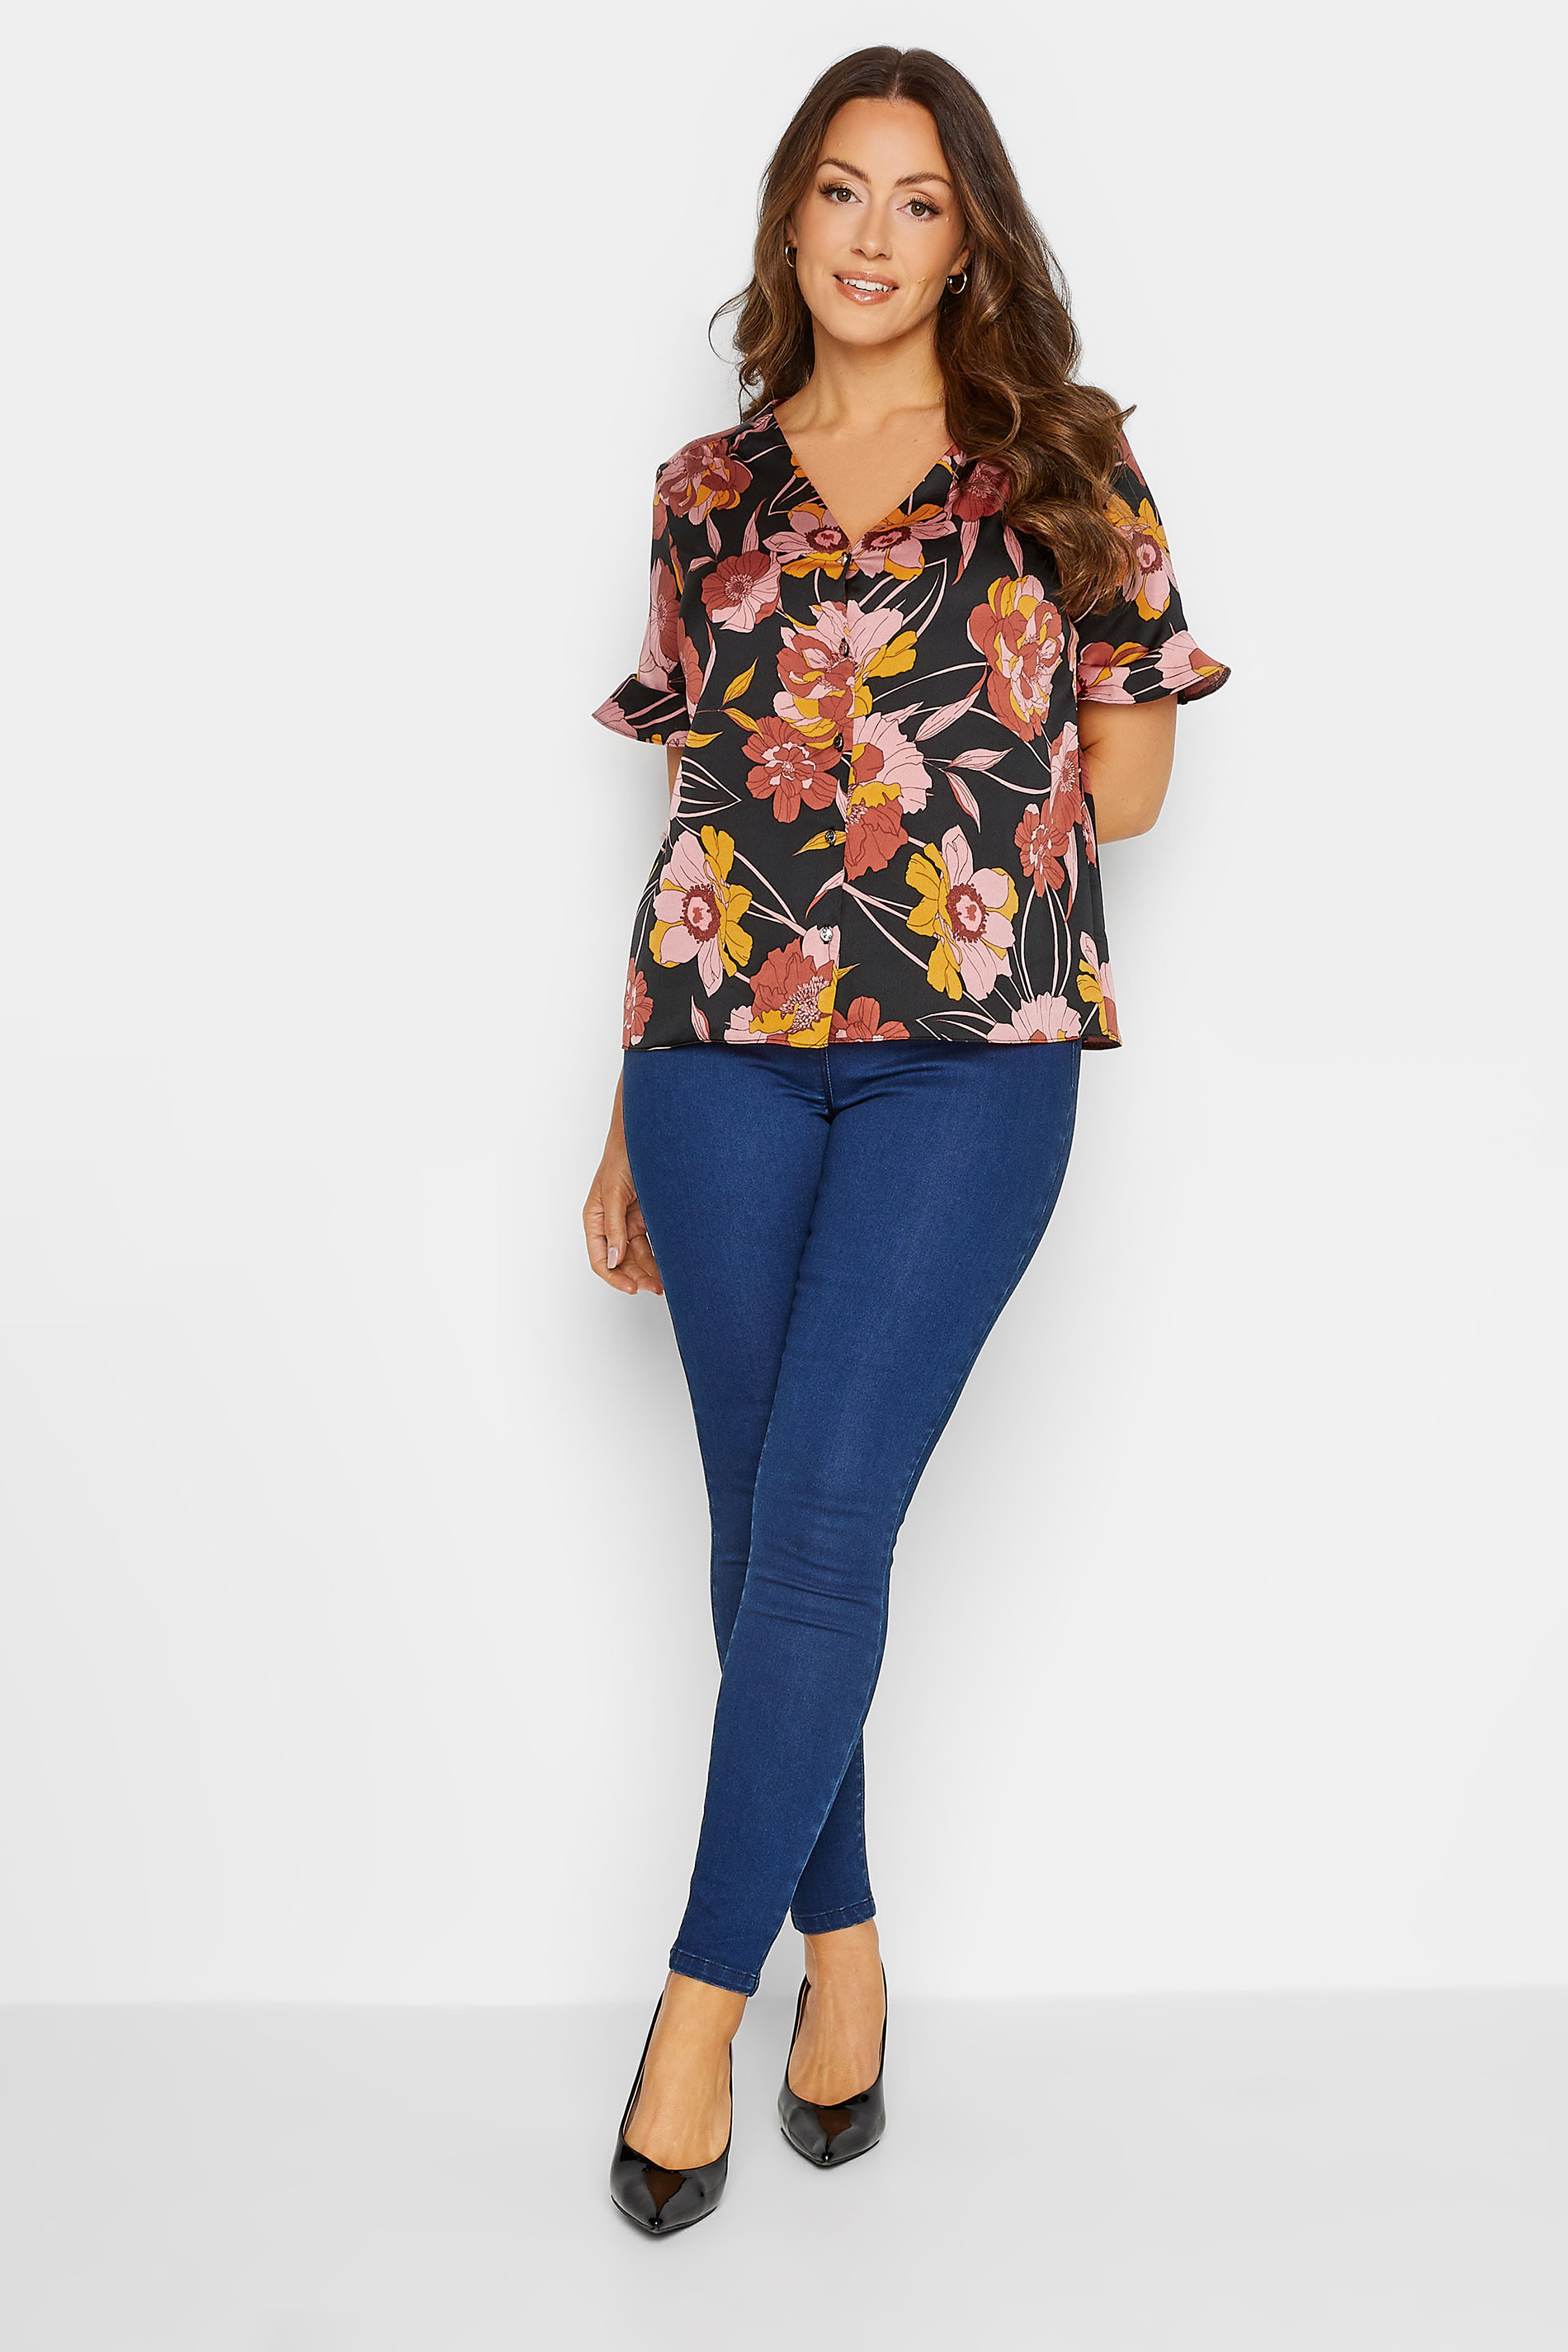 M&Co Black Floral Print Frill Sleeve Blouse | M&Co 2